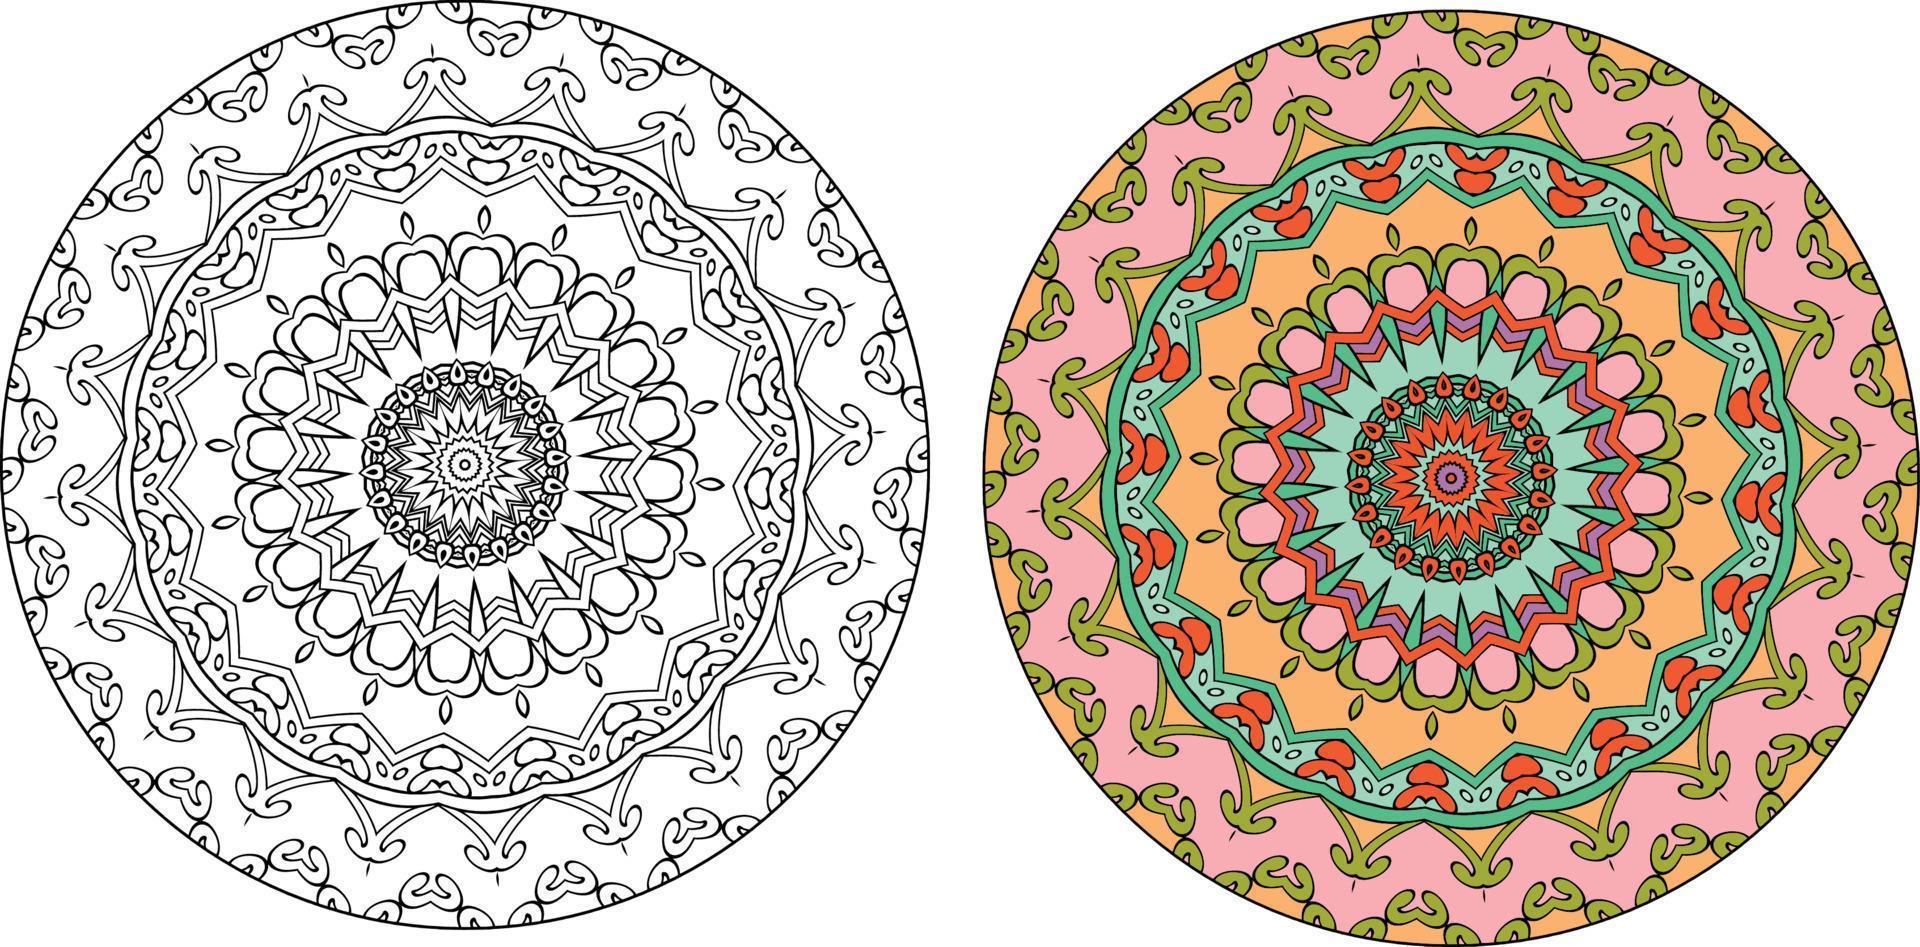 Colorful Mandala. Decorative Round Ornament. Isolated On White Background. Arabic, Indian, Ottoman Motifs. For Cards, Invitations vector